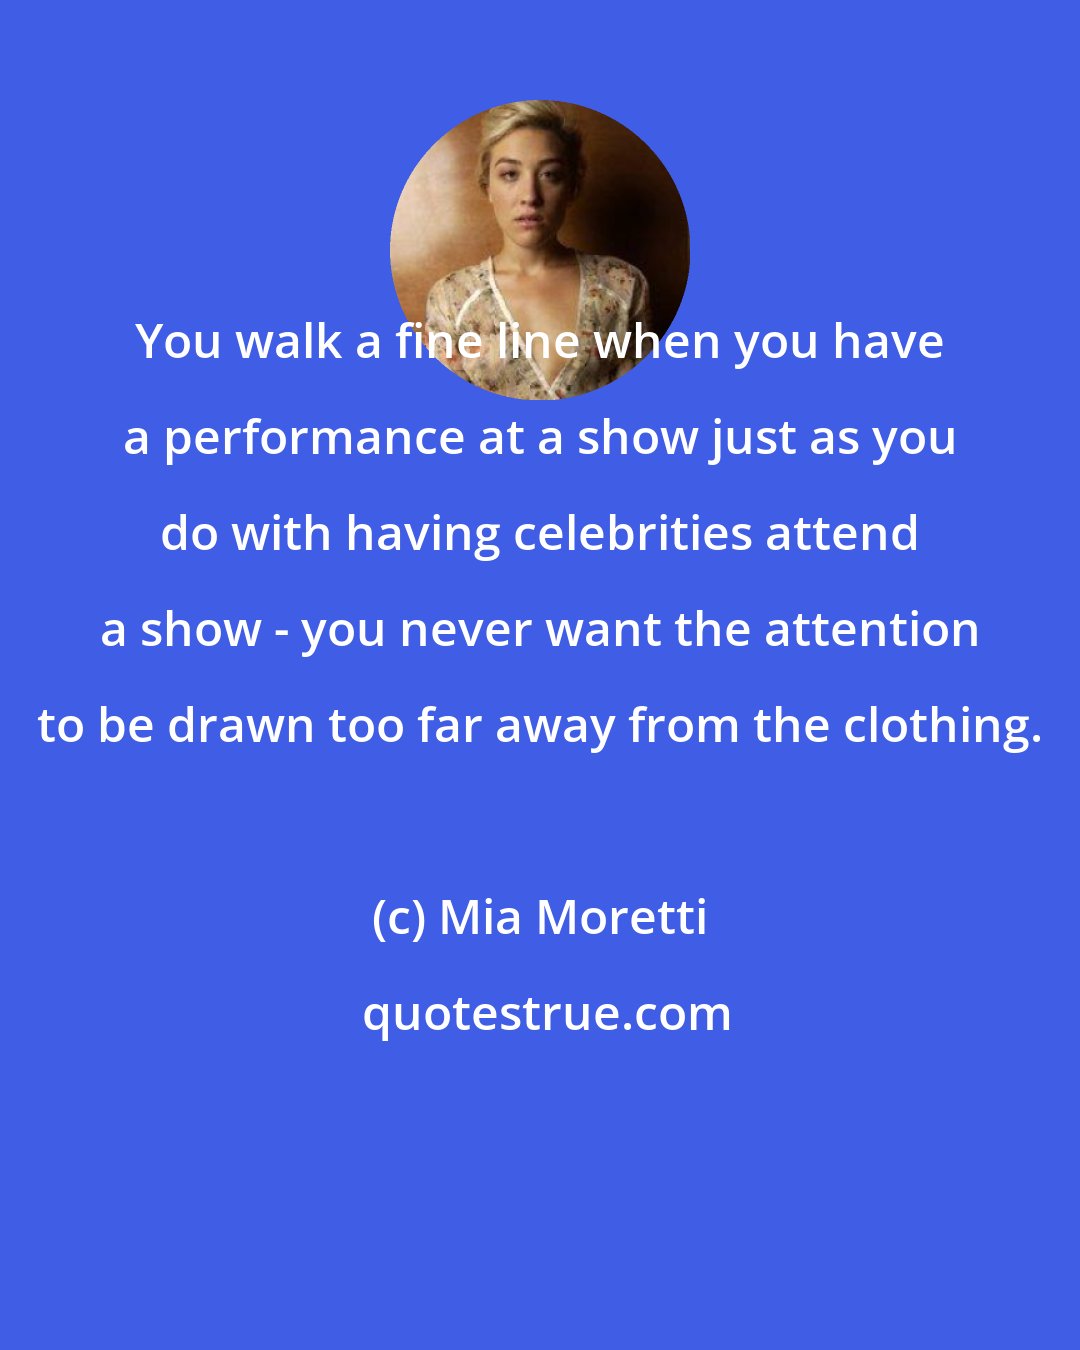 Mia Moretti: You walk a fine line when you have a performance at a show just as you do with having celebrities attend a show - you never want the attention to be drawn too far away from the clothing.